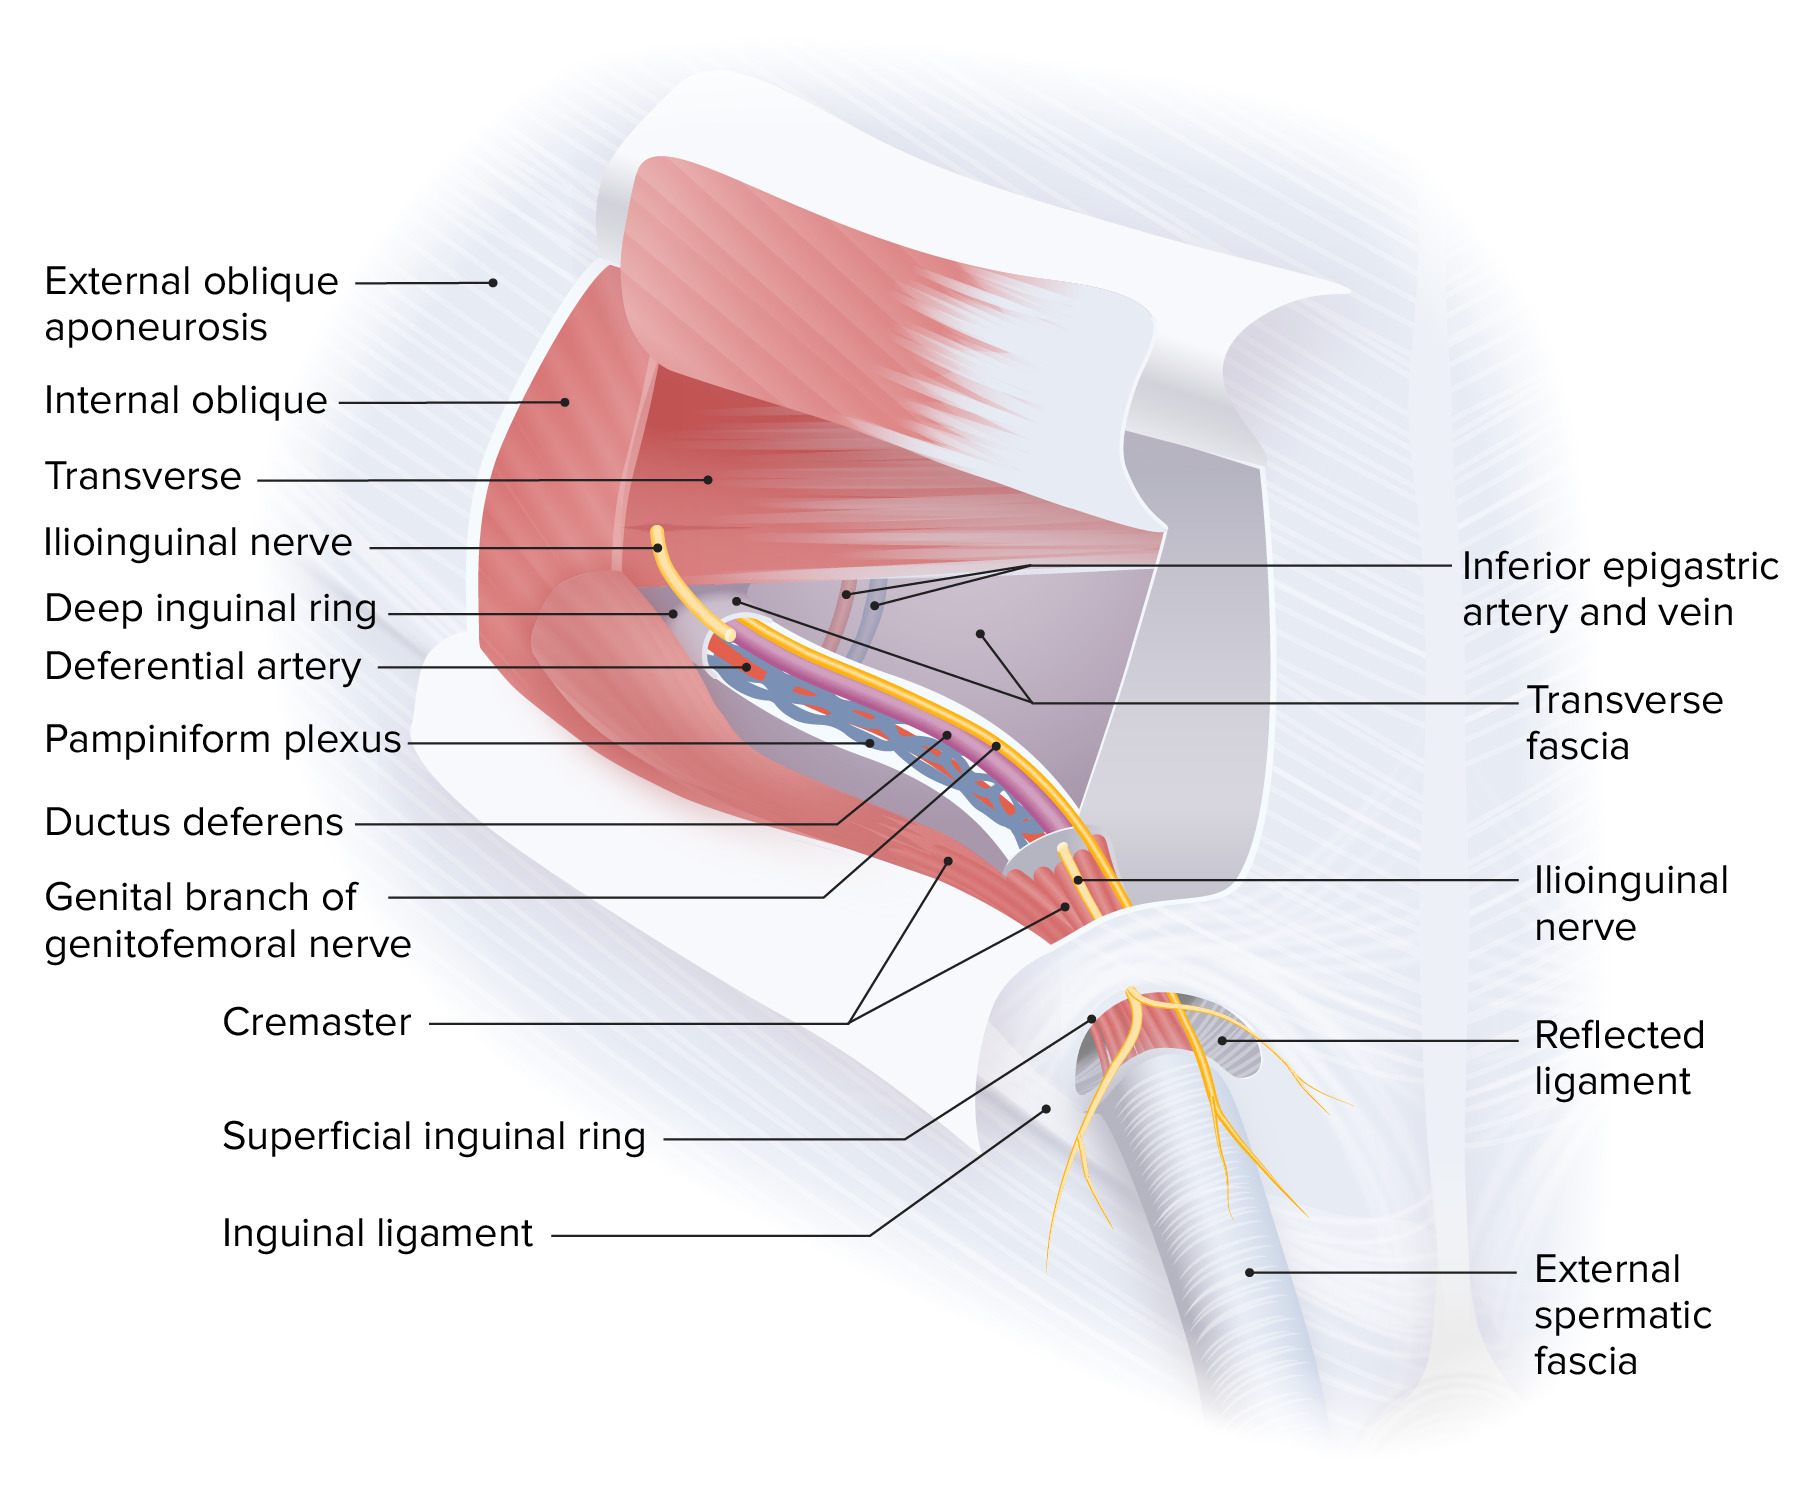 Anatomy of the Superficial Inguinal Ring